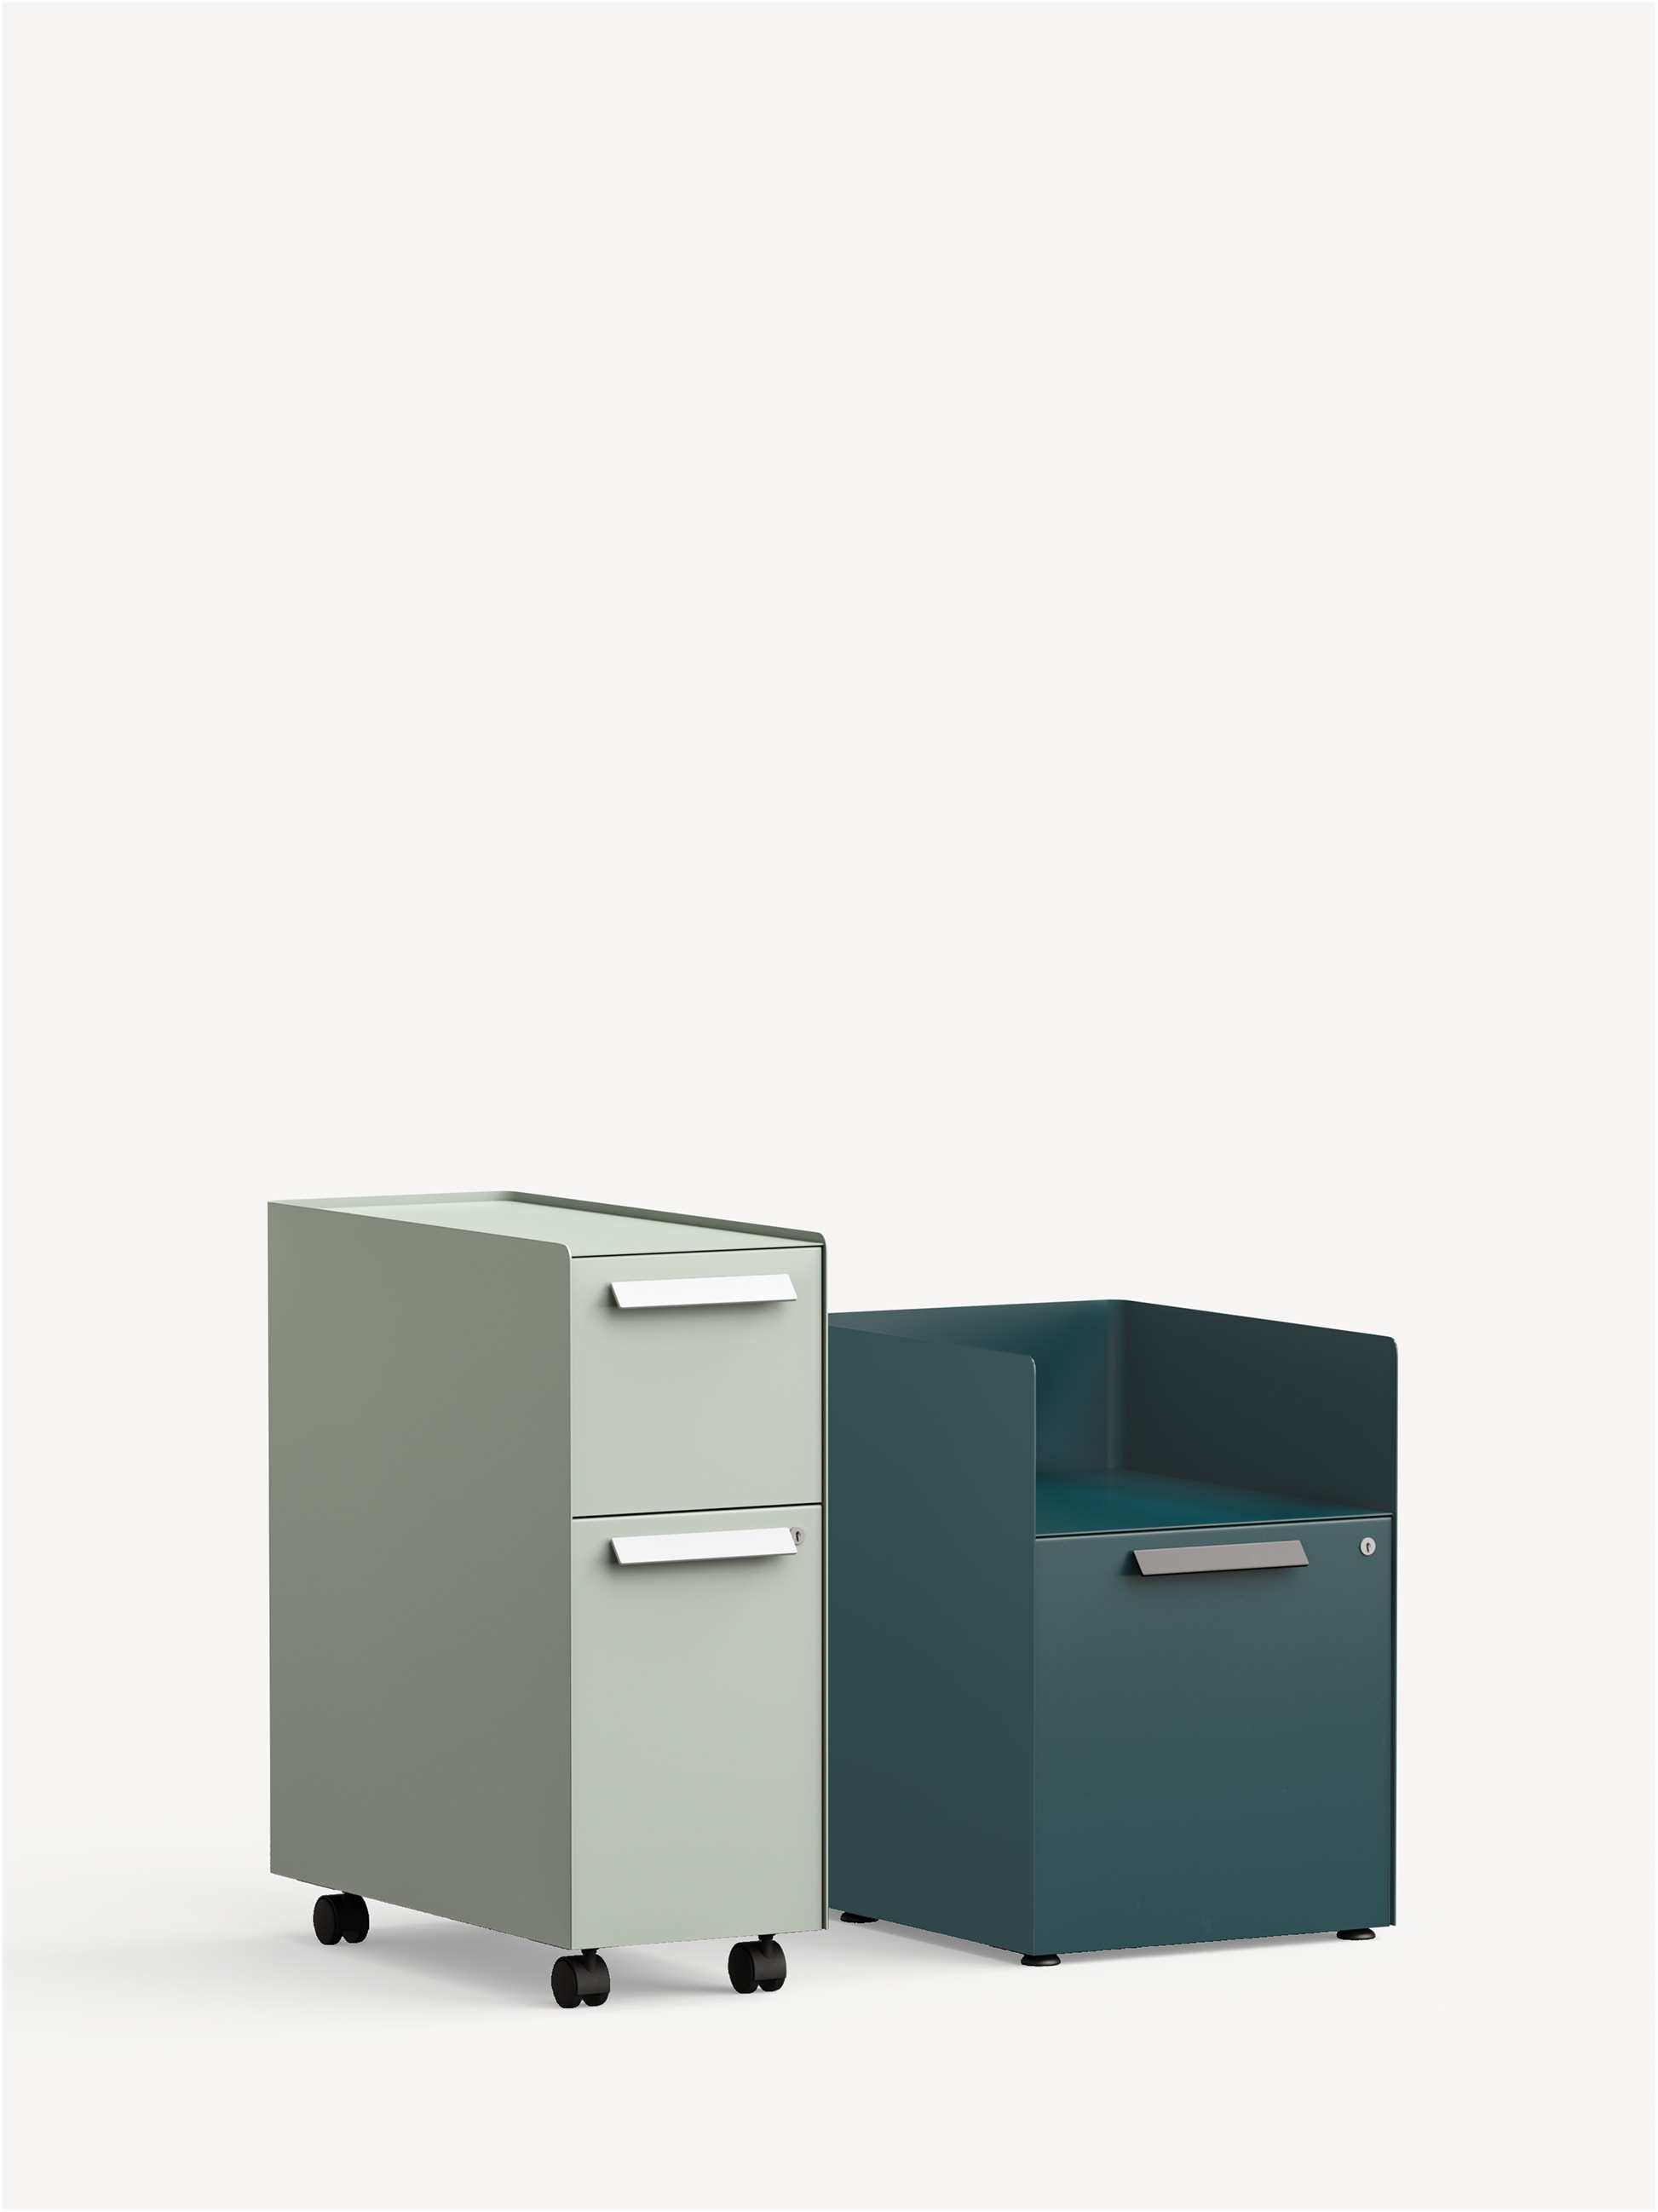 Three-quarter view of a Radii Slim Pedestal in light grey with one box drawer, one file drawer, bar pulls and casters next to a Radii Alcove pedestal in dark teal with glides, one file drawer and bar pulls.